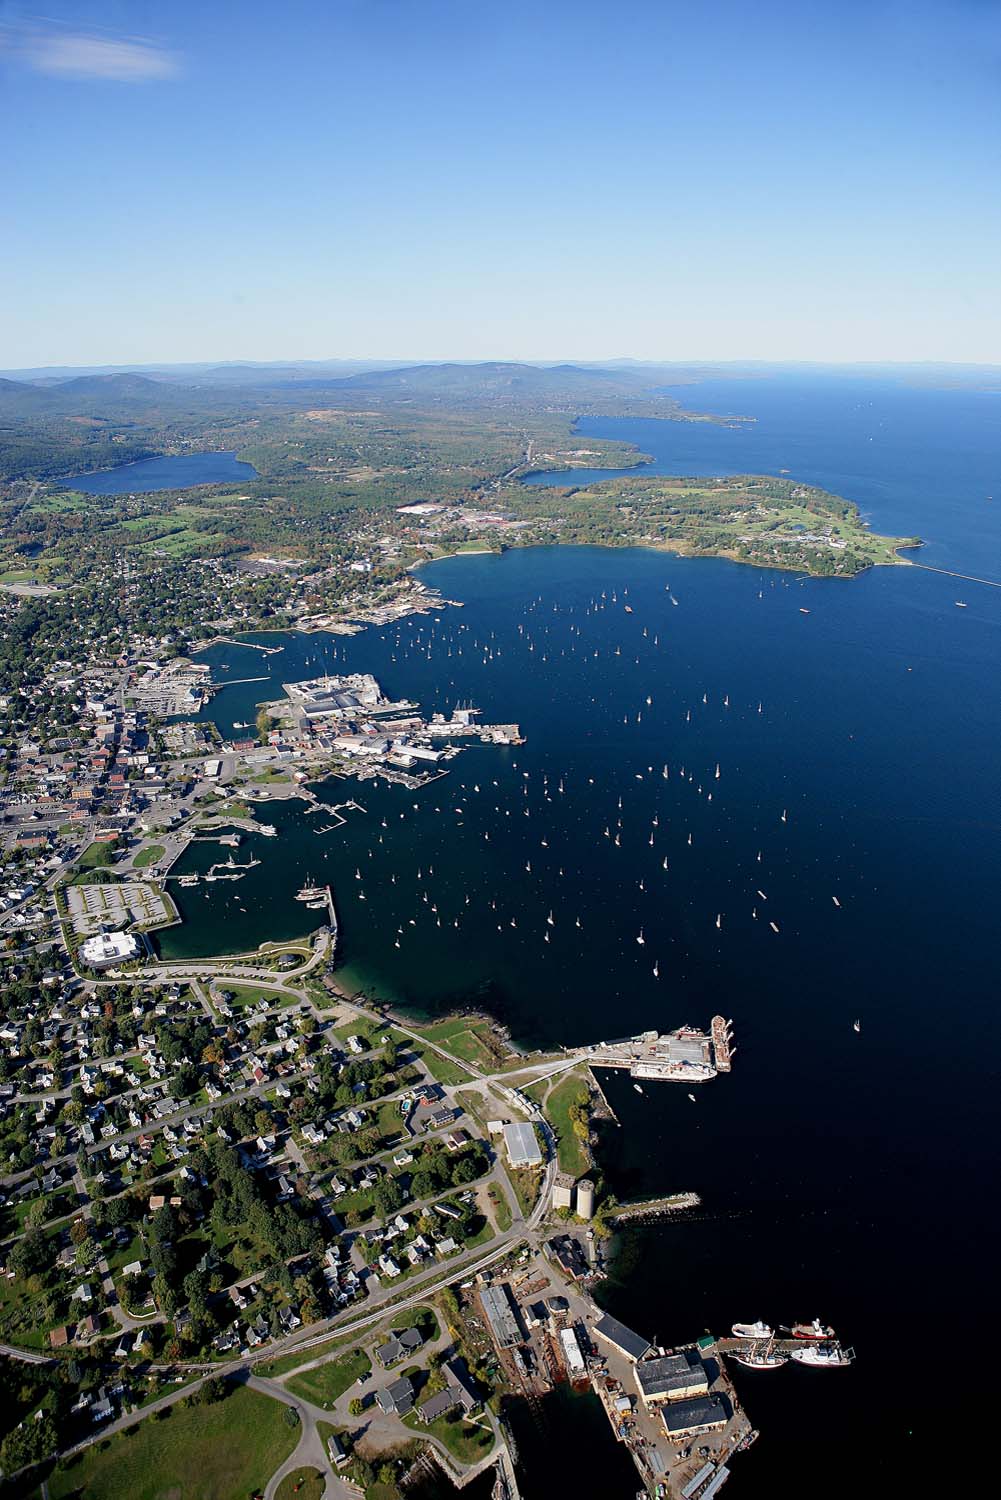 Rockland Maine and Penobscot Bay